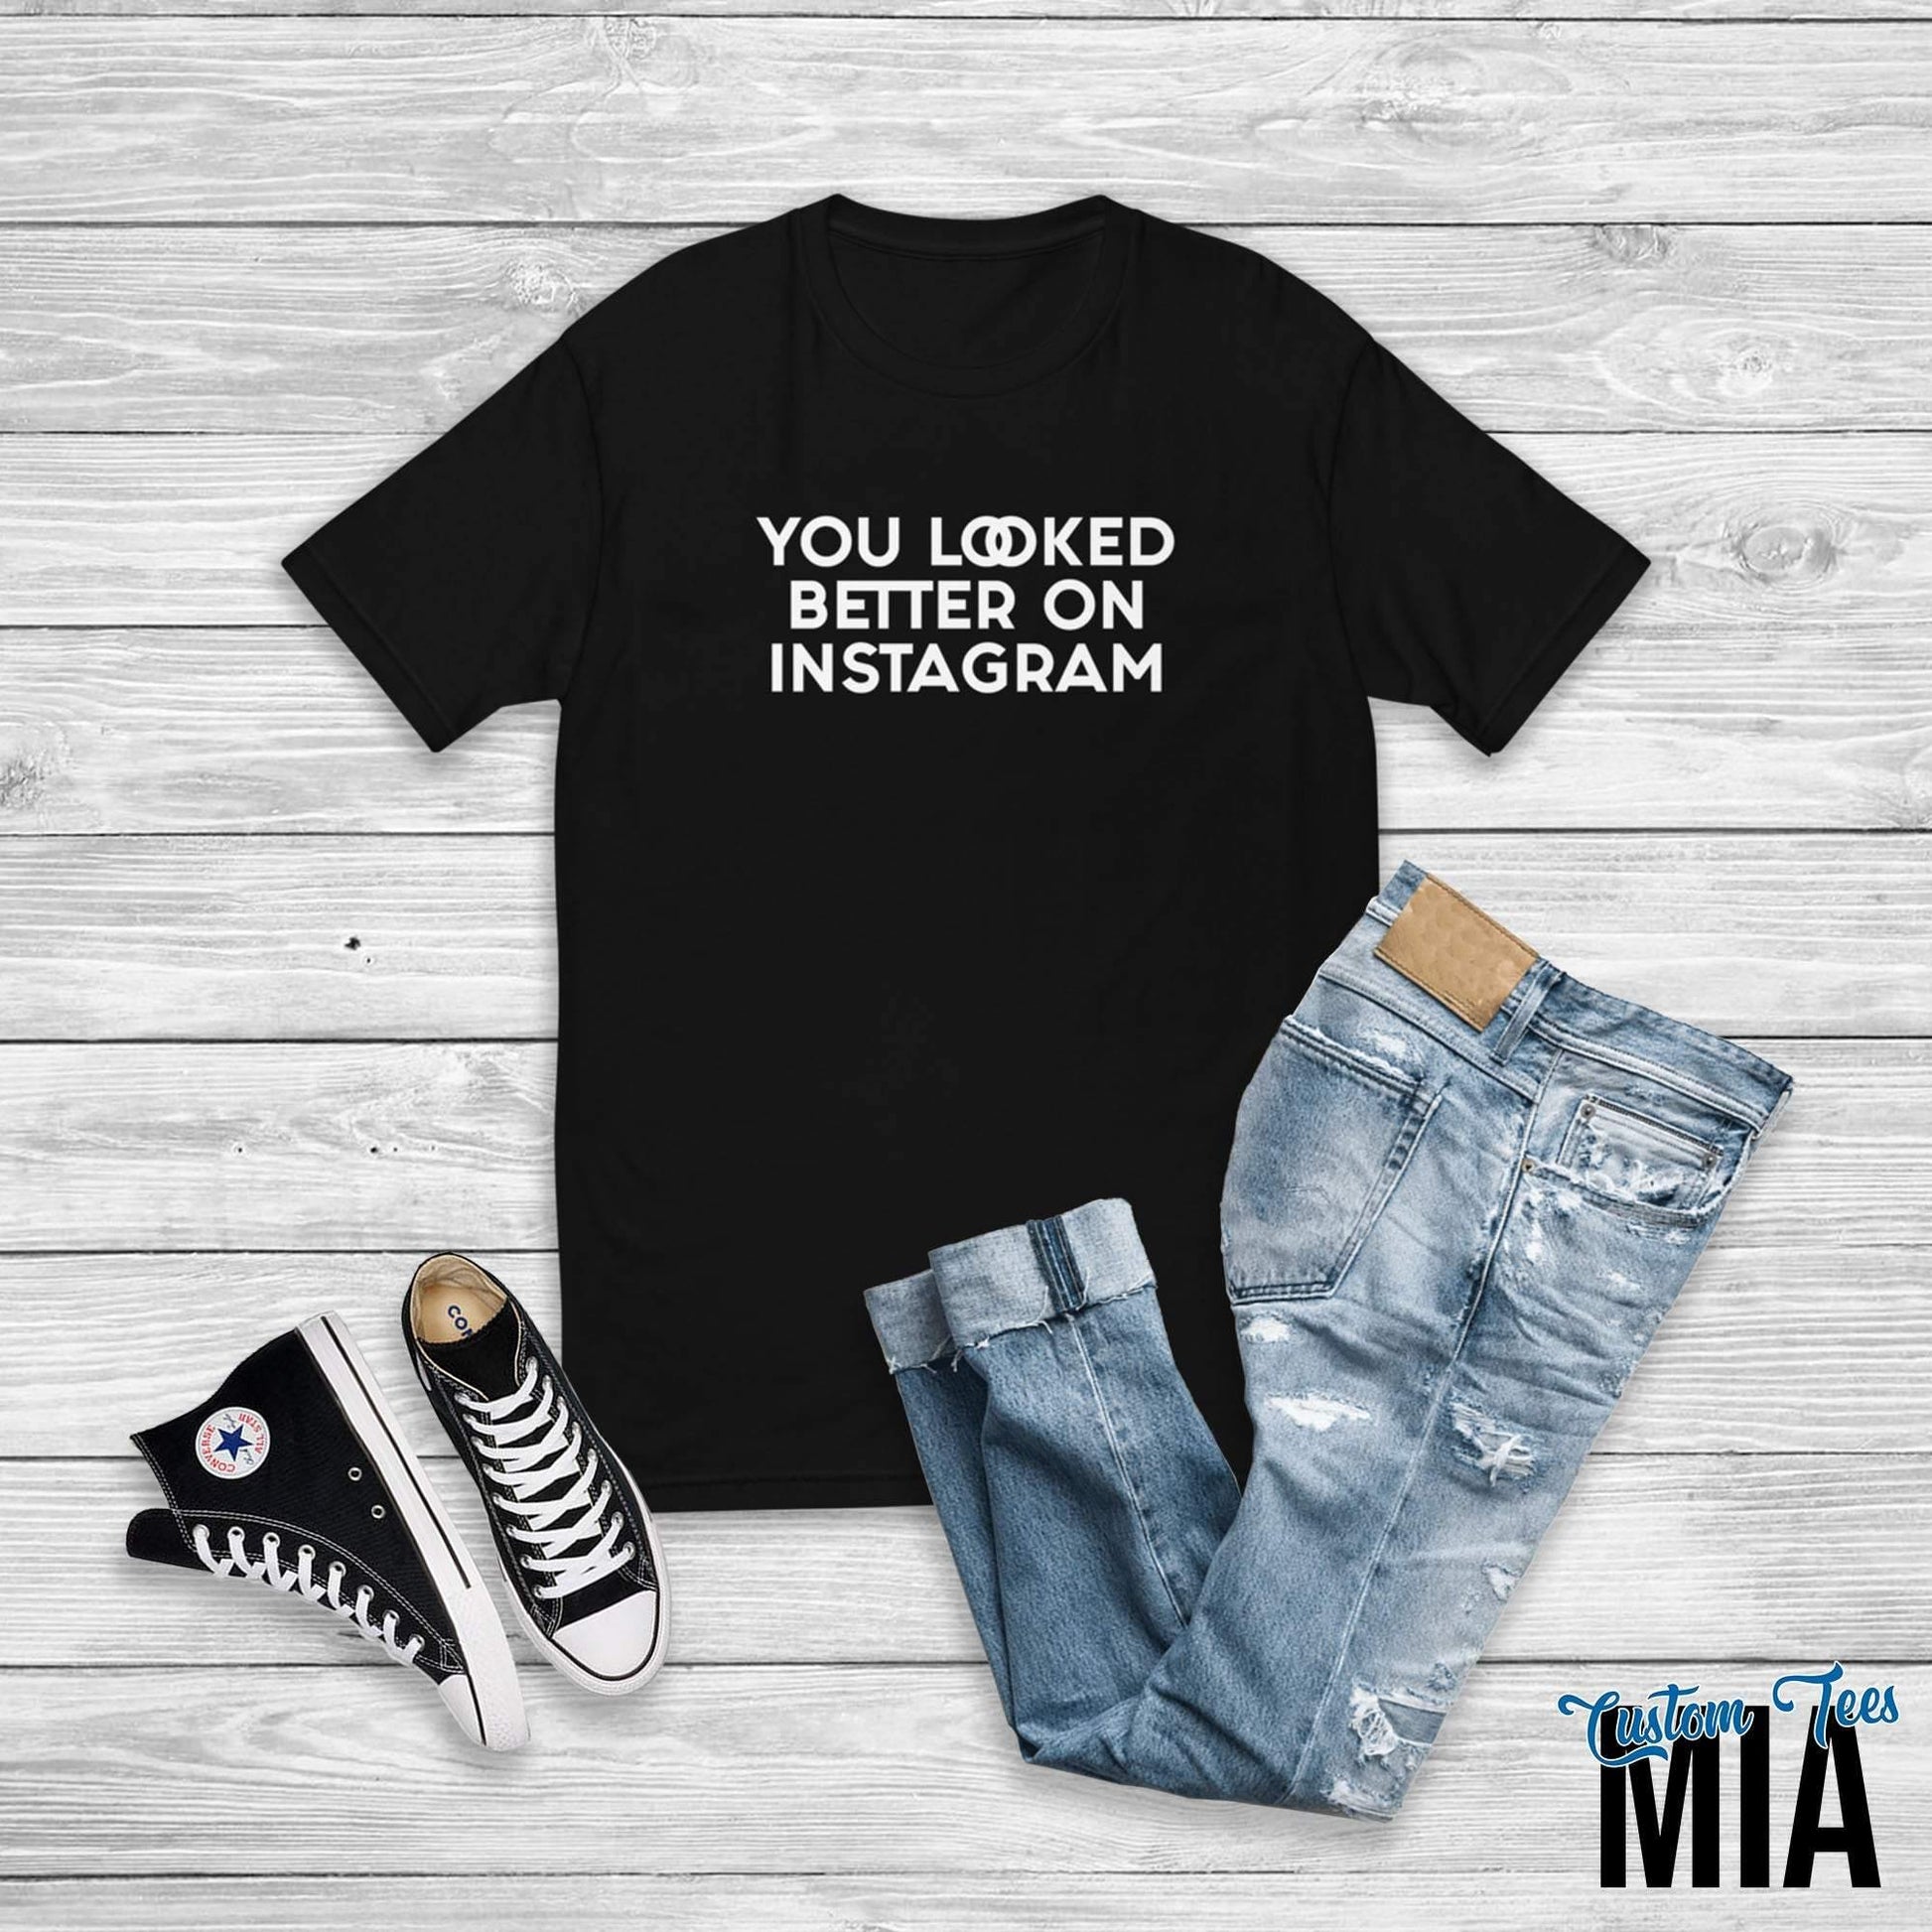 You Looked Better on Instagram Shirt - Custom Tees MIA